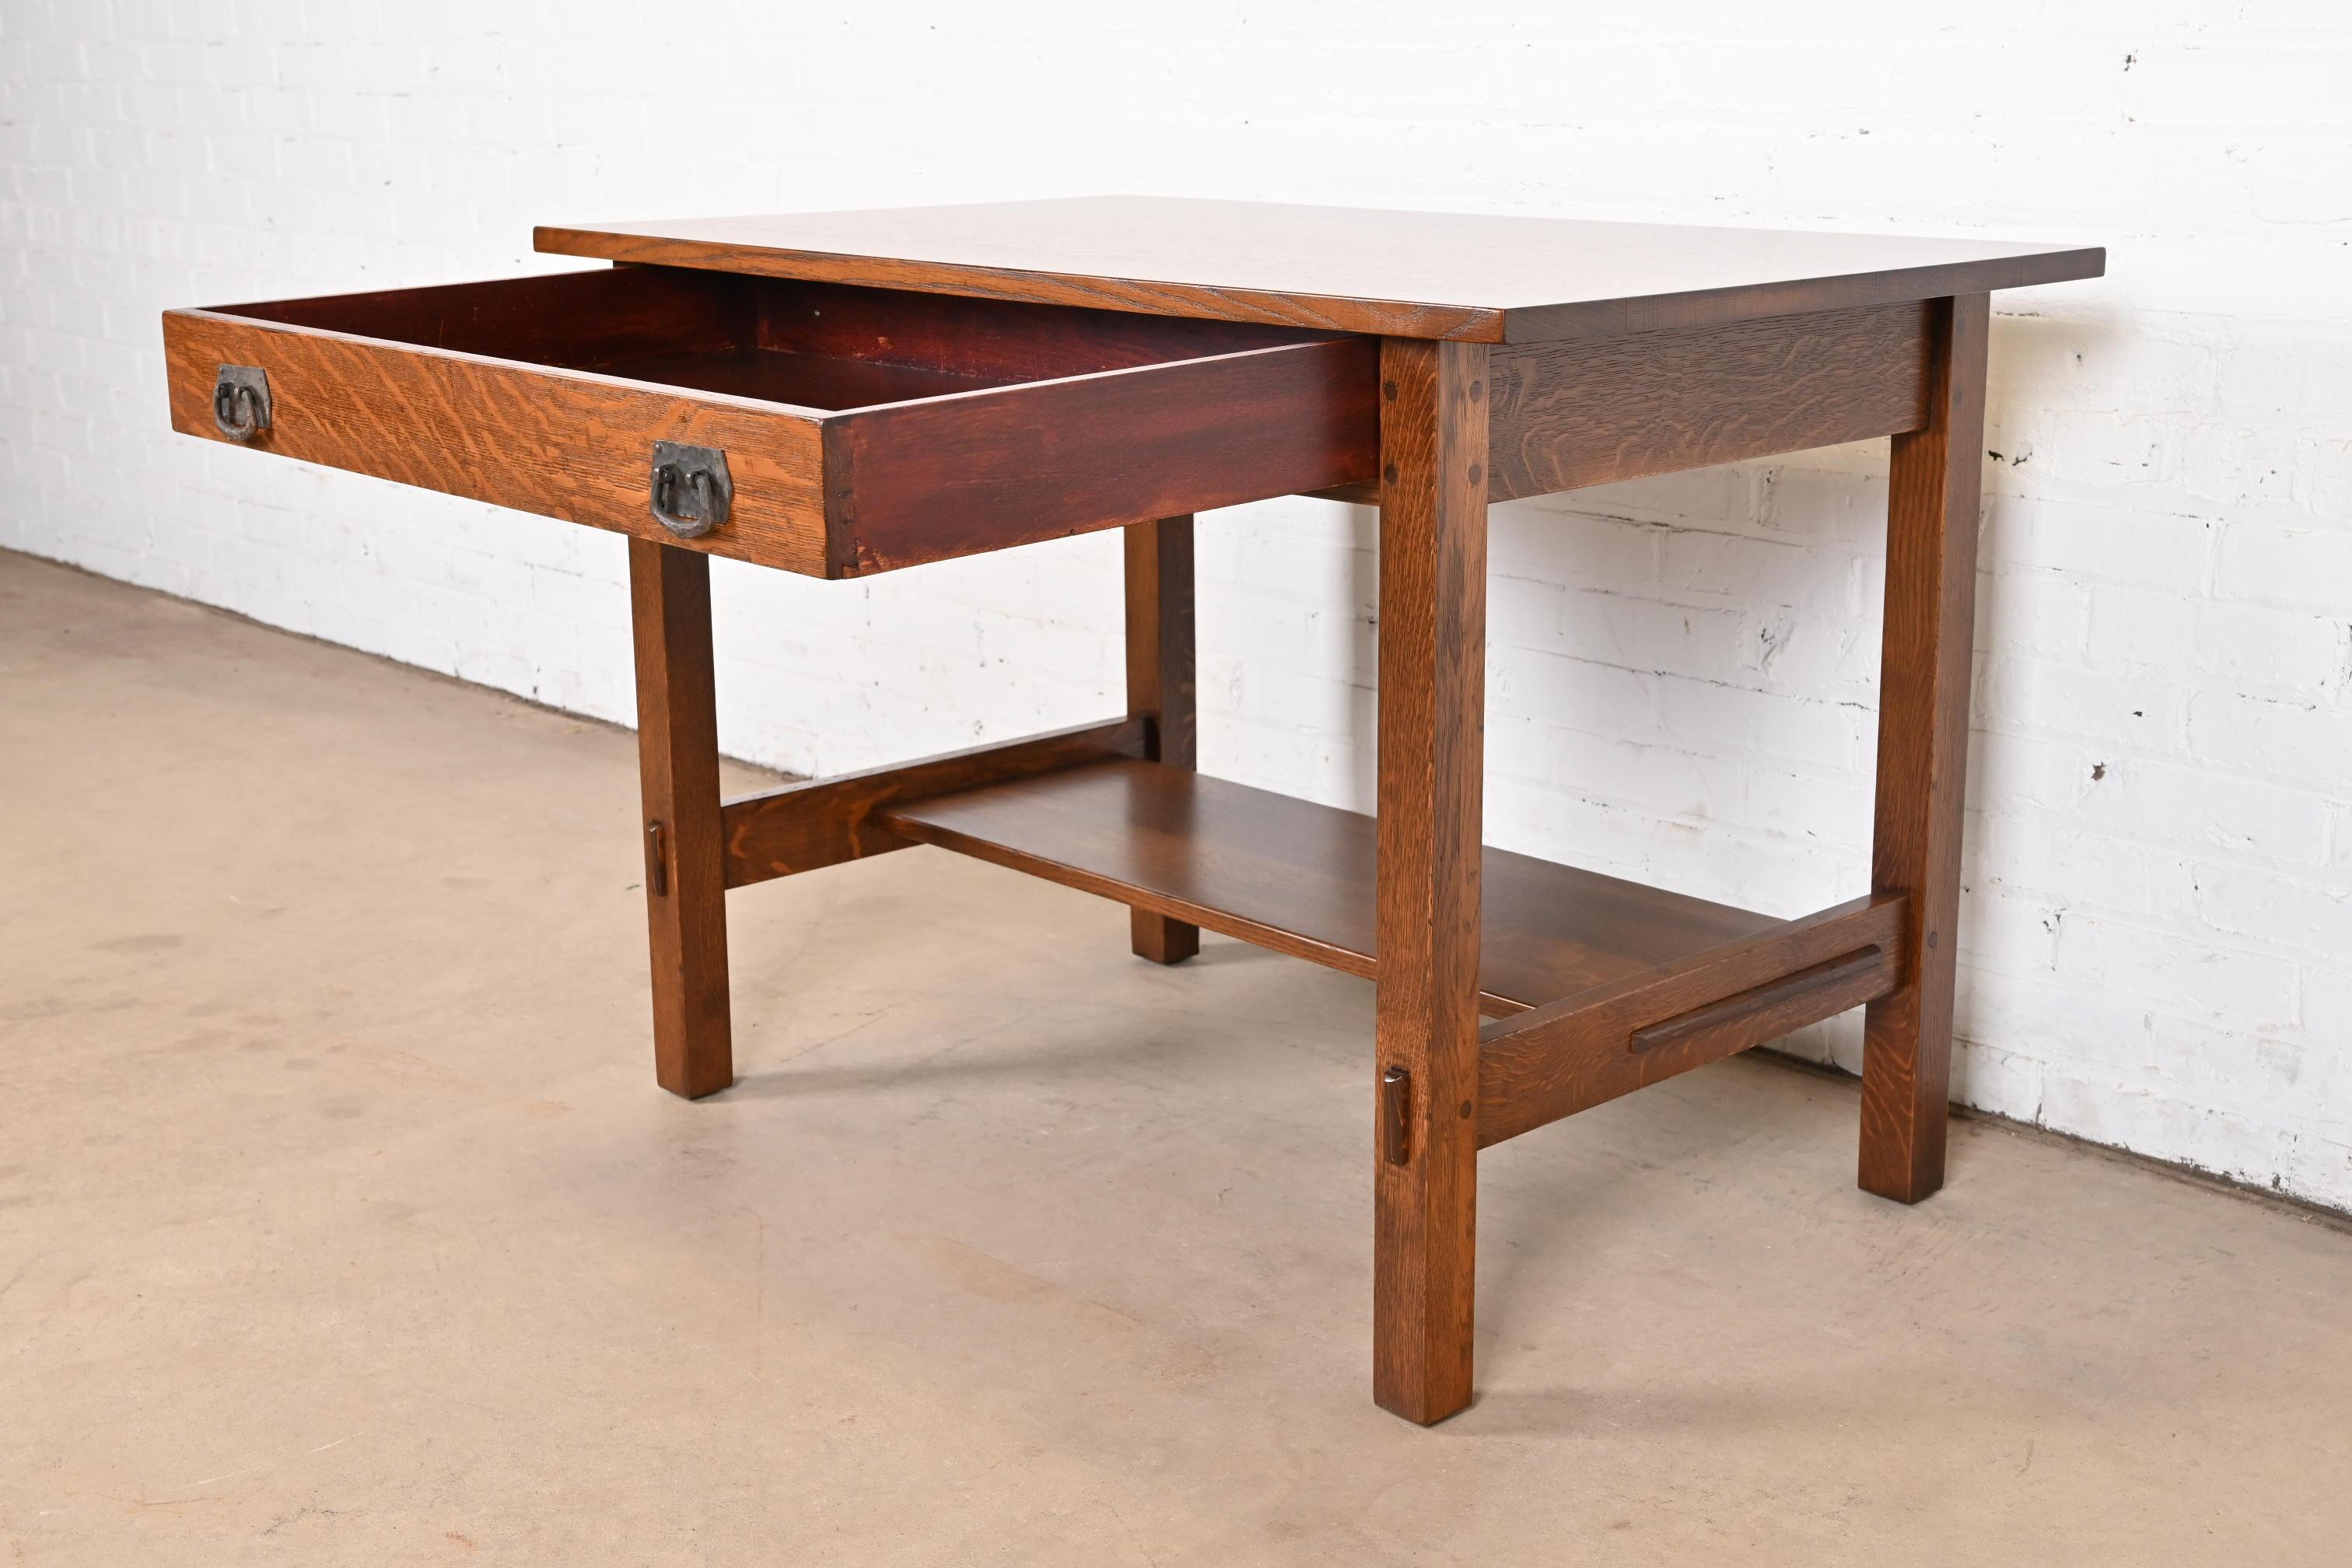 Copper Gustav Stickley Mission Oak Arts & Crafts Desk or Library Table, Newly Restored For Sale